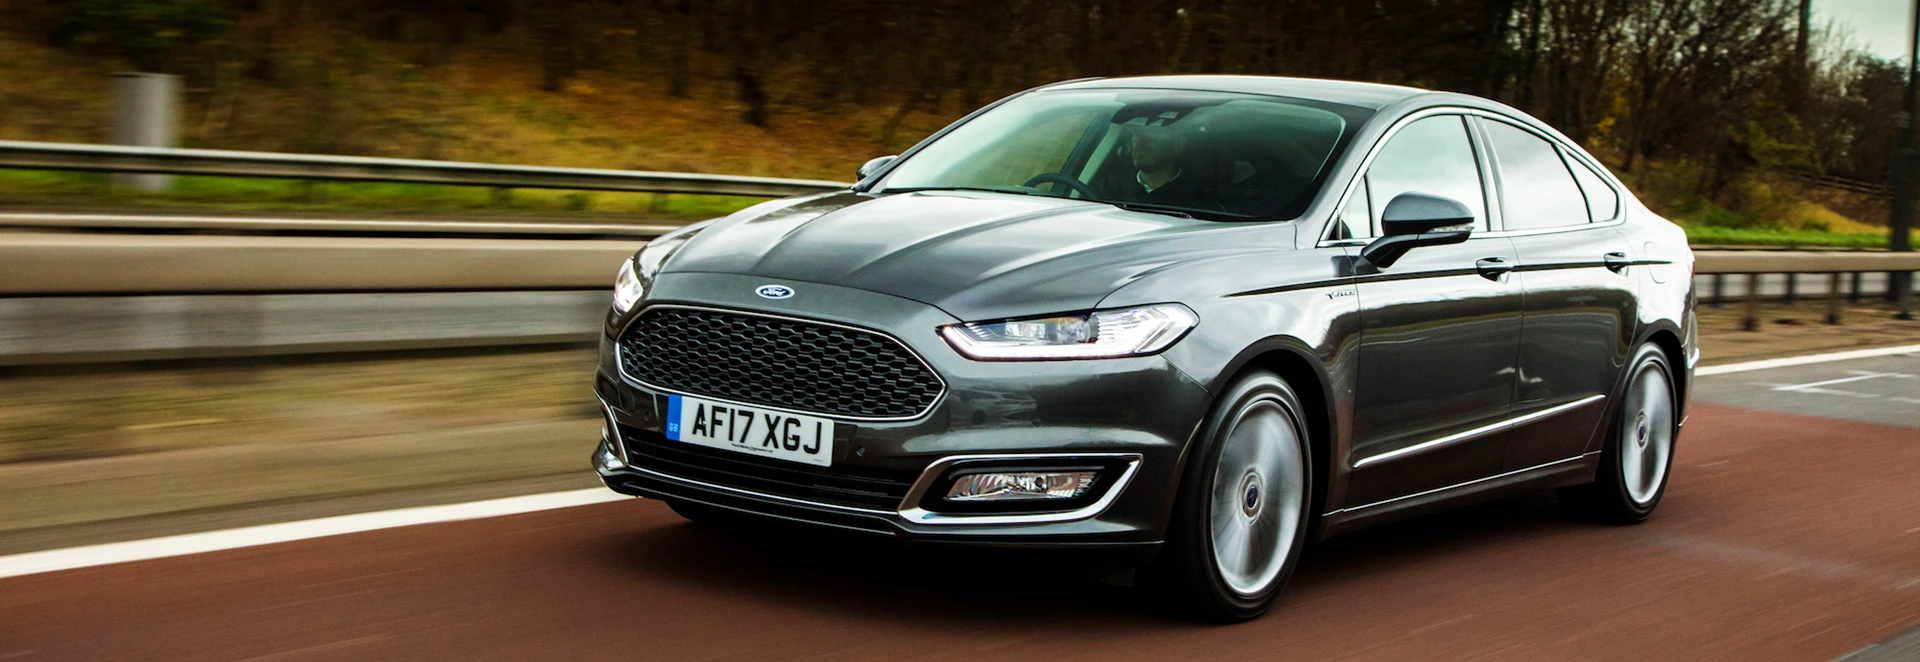 All you need to know about Ford’s Motability Car Scheme